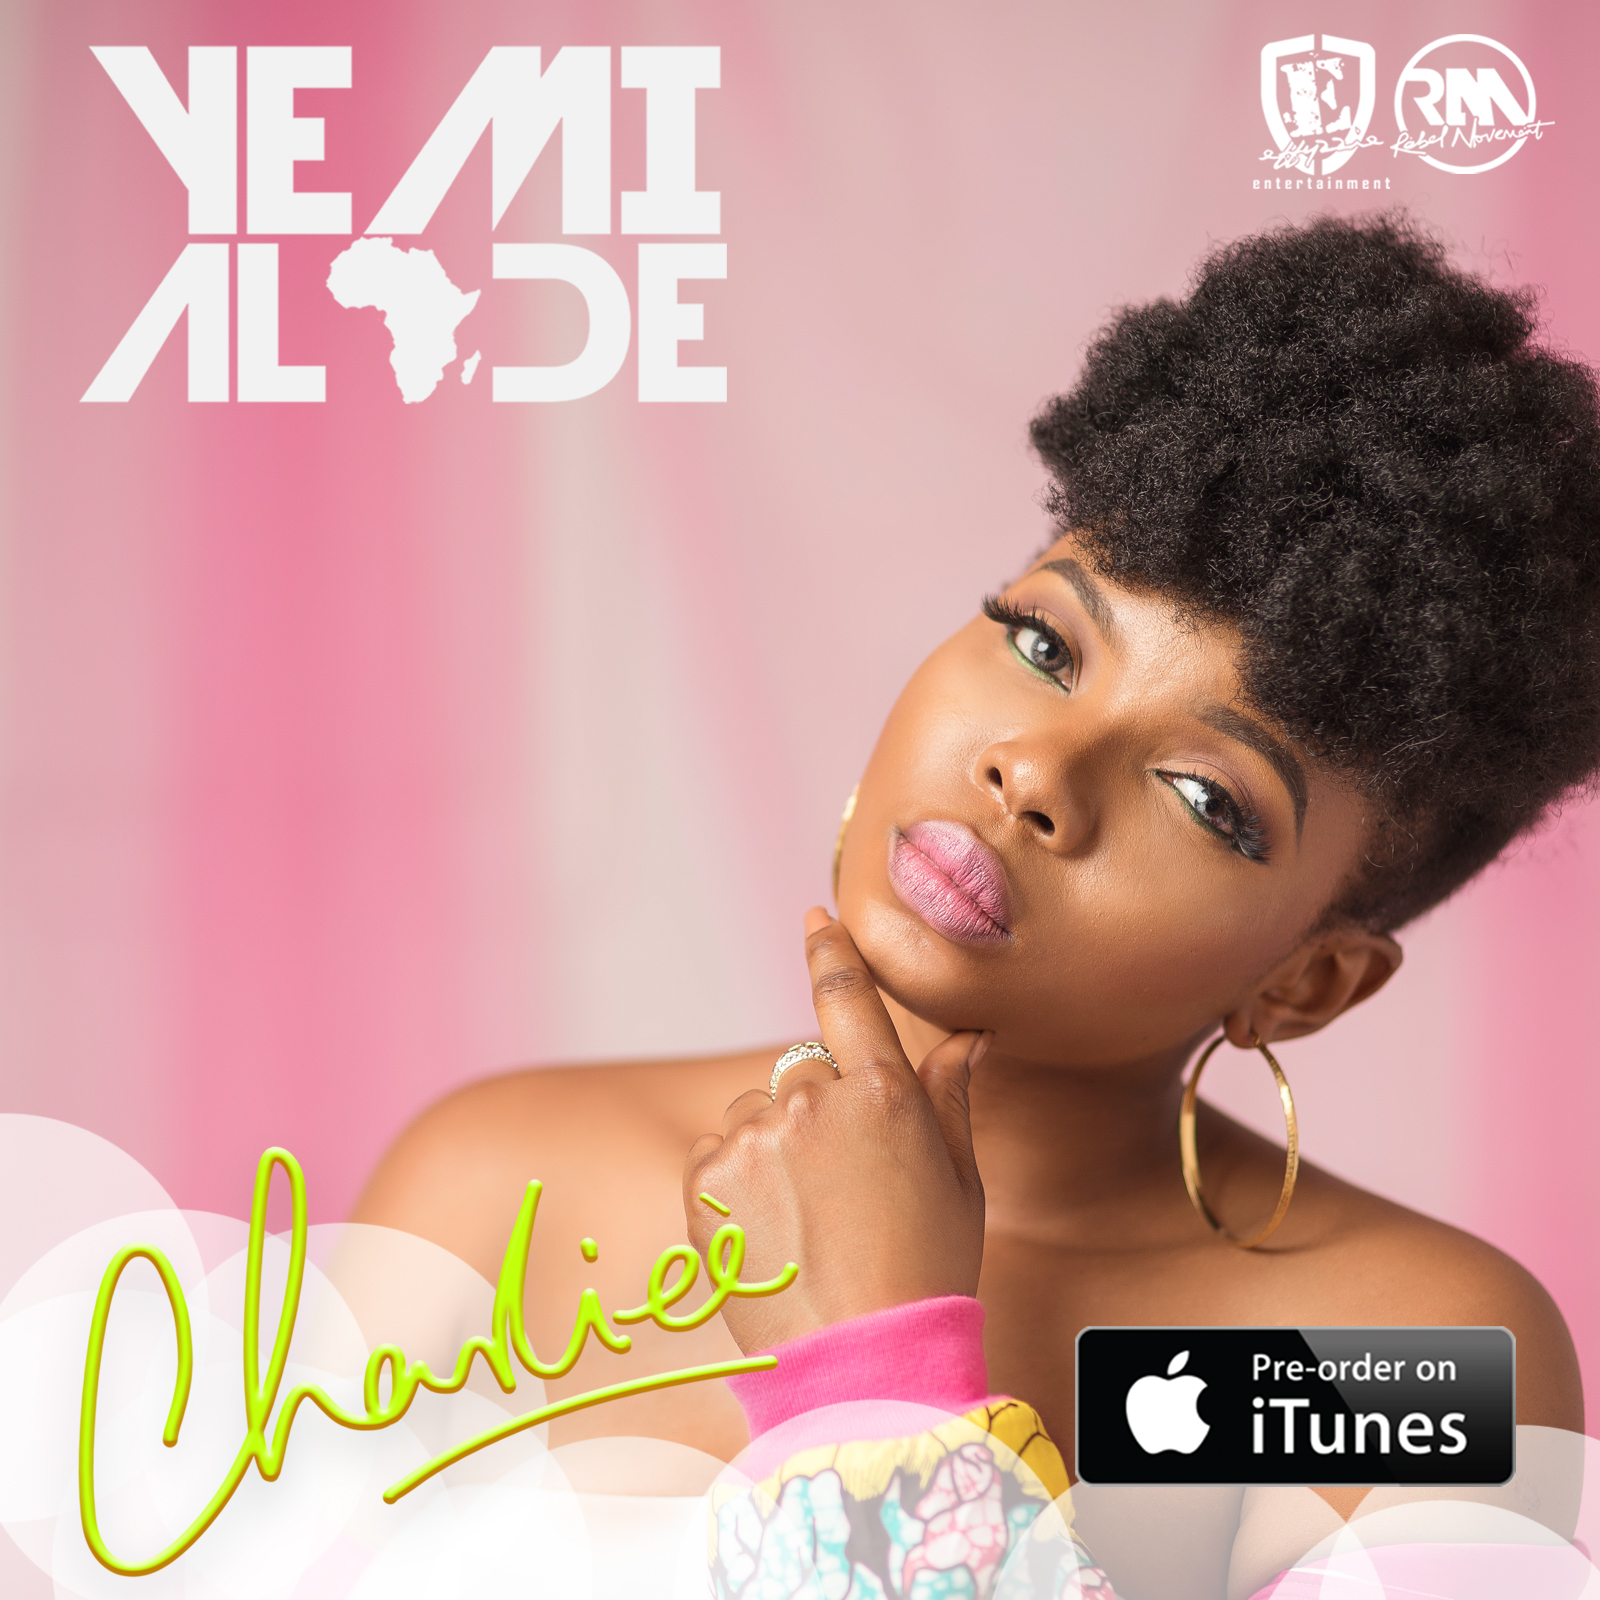 Yemi Alade Releases New Single "Charliee" For Pre-Order 